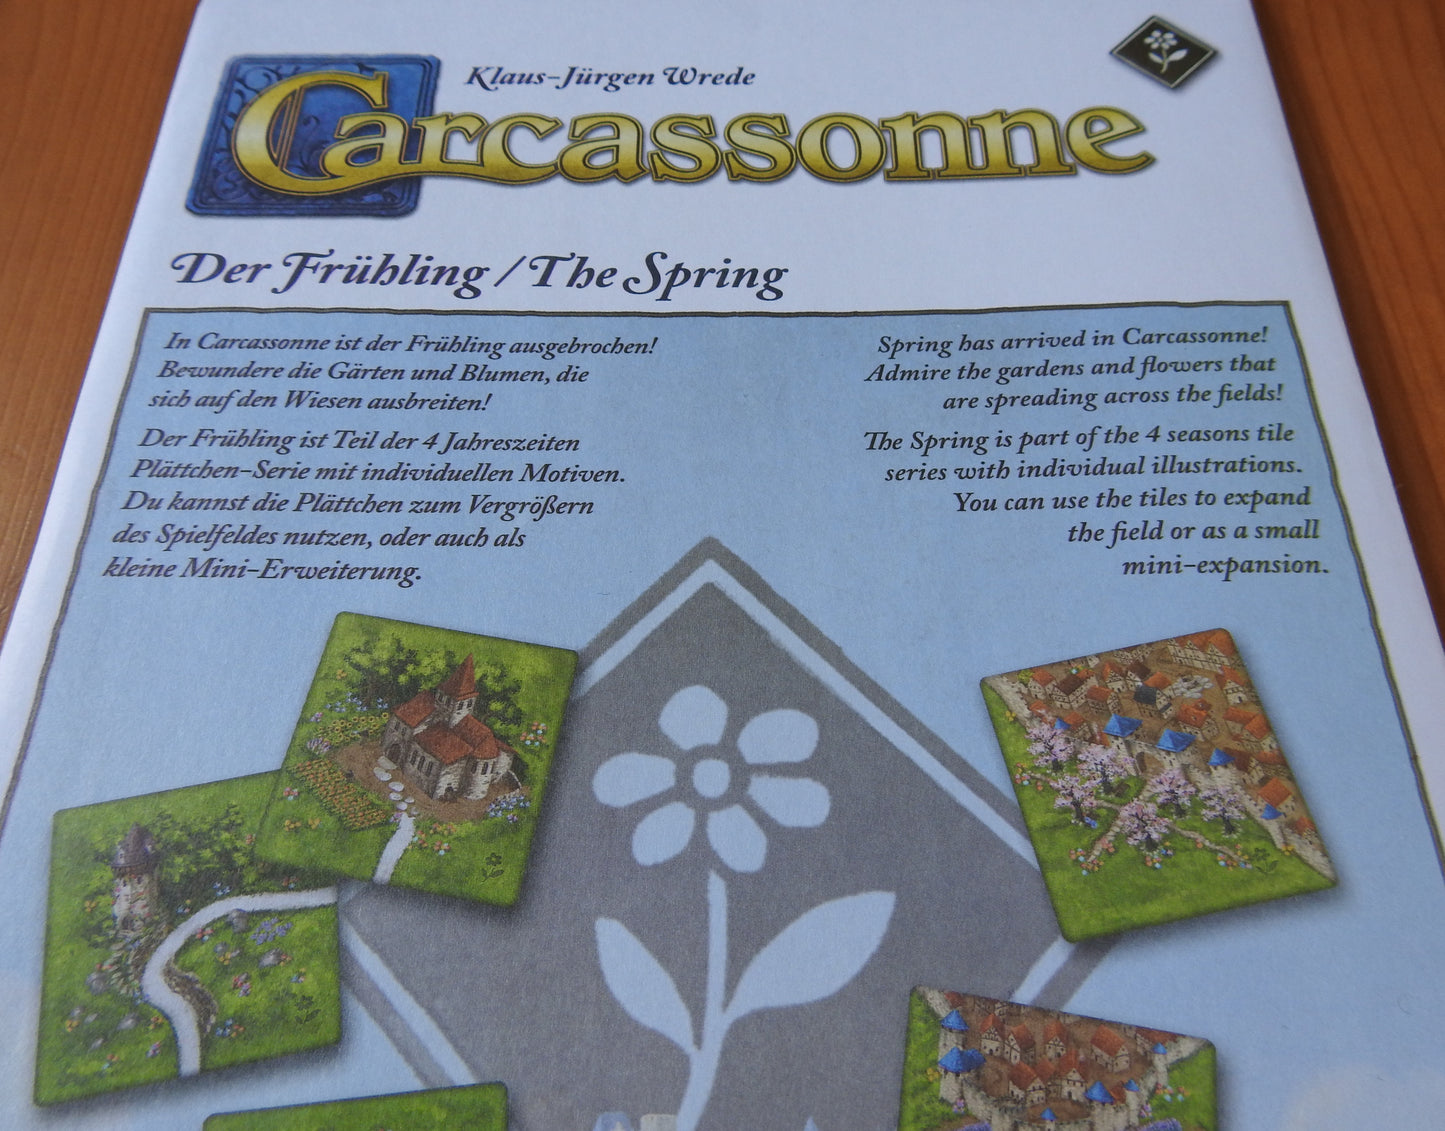 View of the envelope that the tiles come in for this Spring mini expansion for Carcassonne.